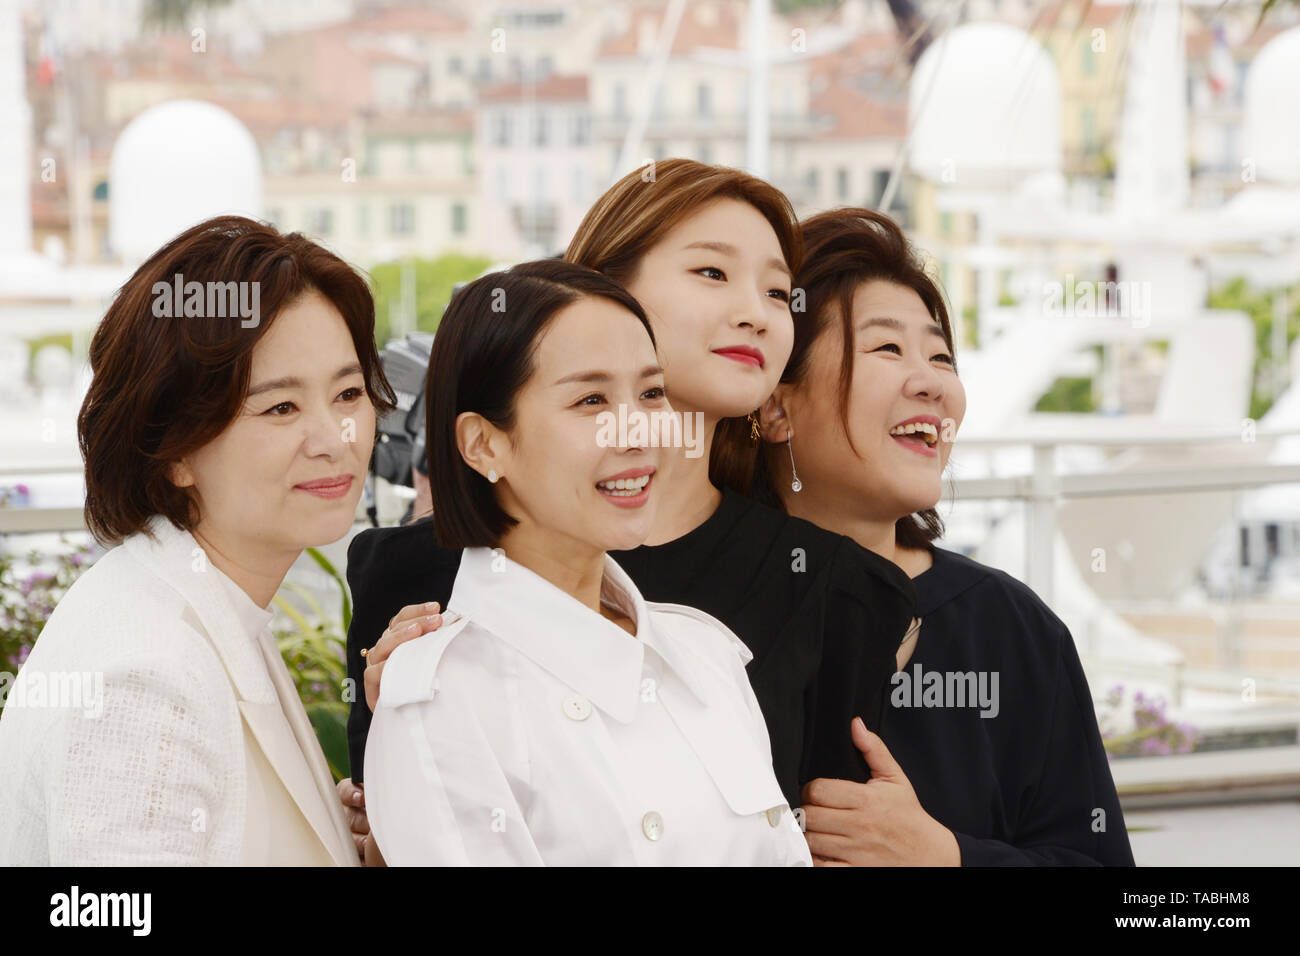 May 22, 2019 - Cannes, France - CANNES, FRANCE - MAY 22: Chang Hyae-Jin, Cho Yeo-Jeong, Park So-Dam and Lee Jung-Eun attend the photocall for ''Parasite'' during the 72nd annual Cannes Film Festival on May 22, 2019 in Cannes, France. (Credit Image: © Frederick InjimbertZUMA Wire) Stock Photo